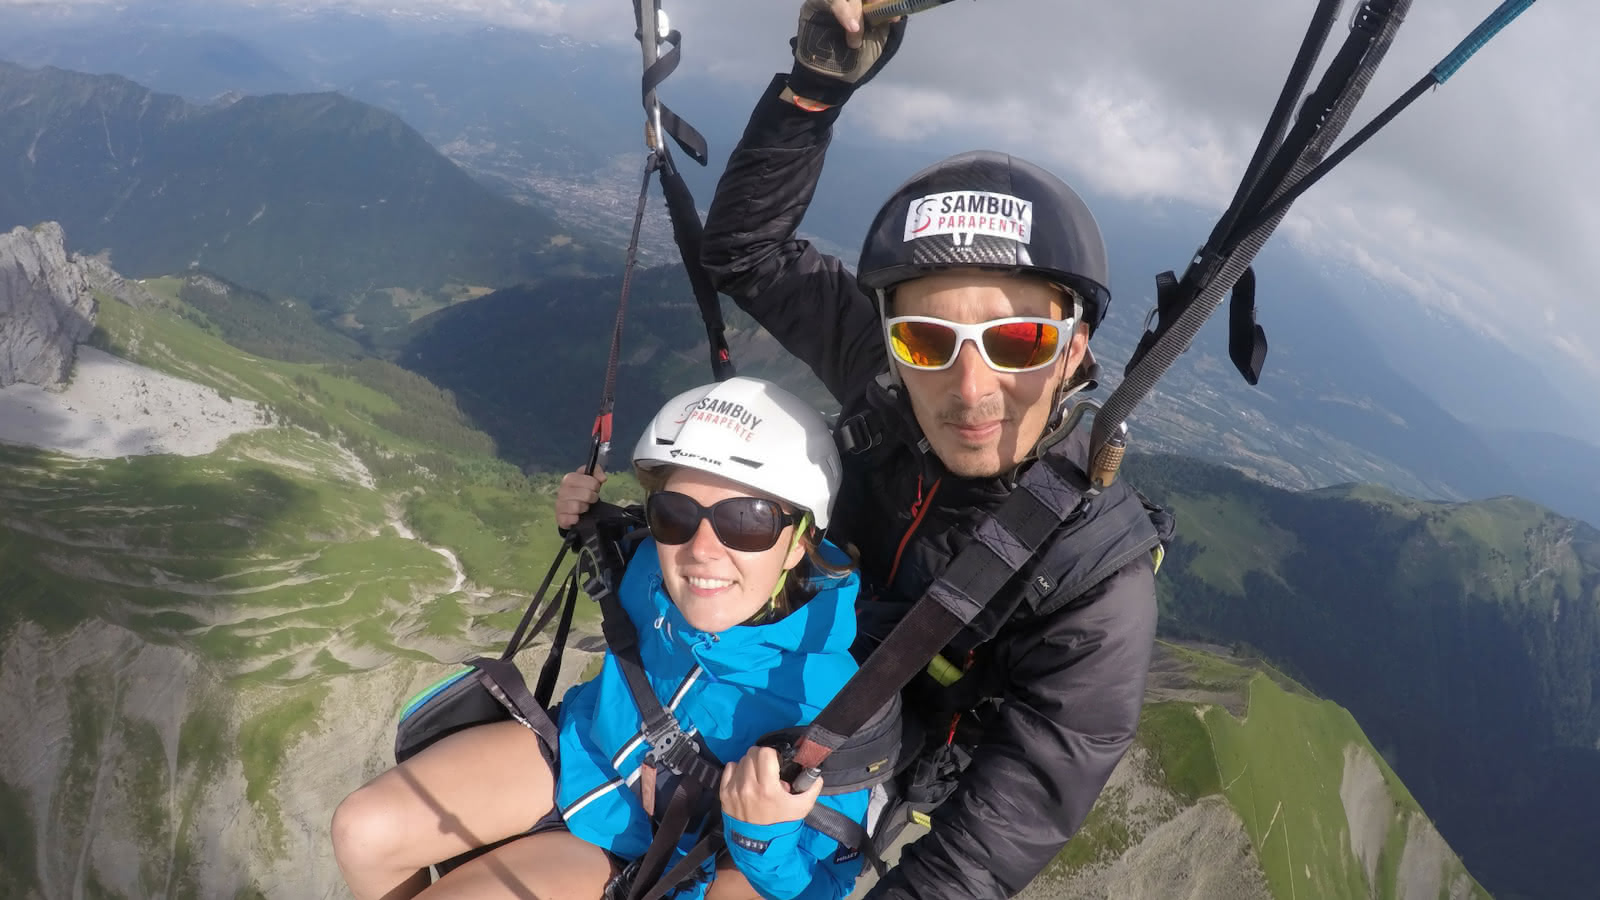 tandem paragliding flight above the mountains